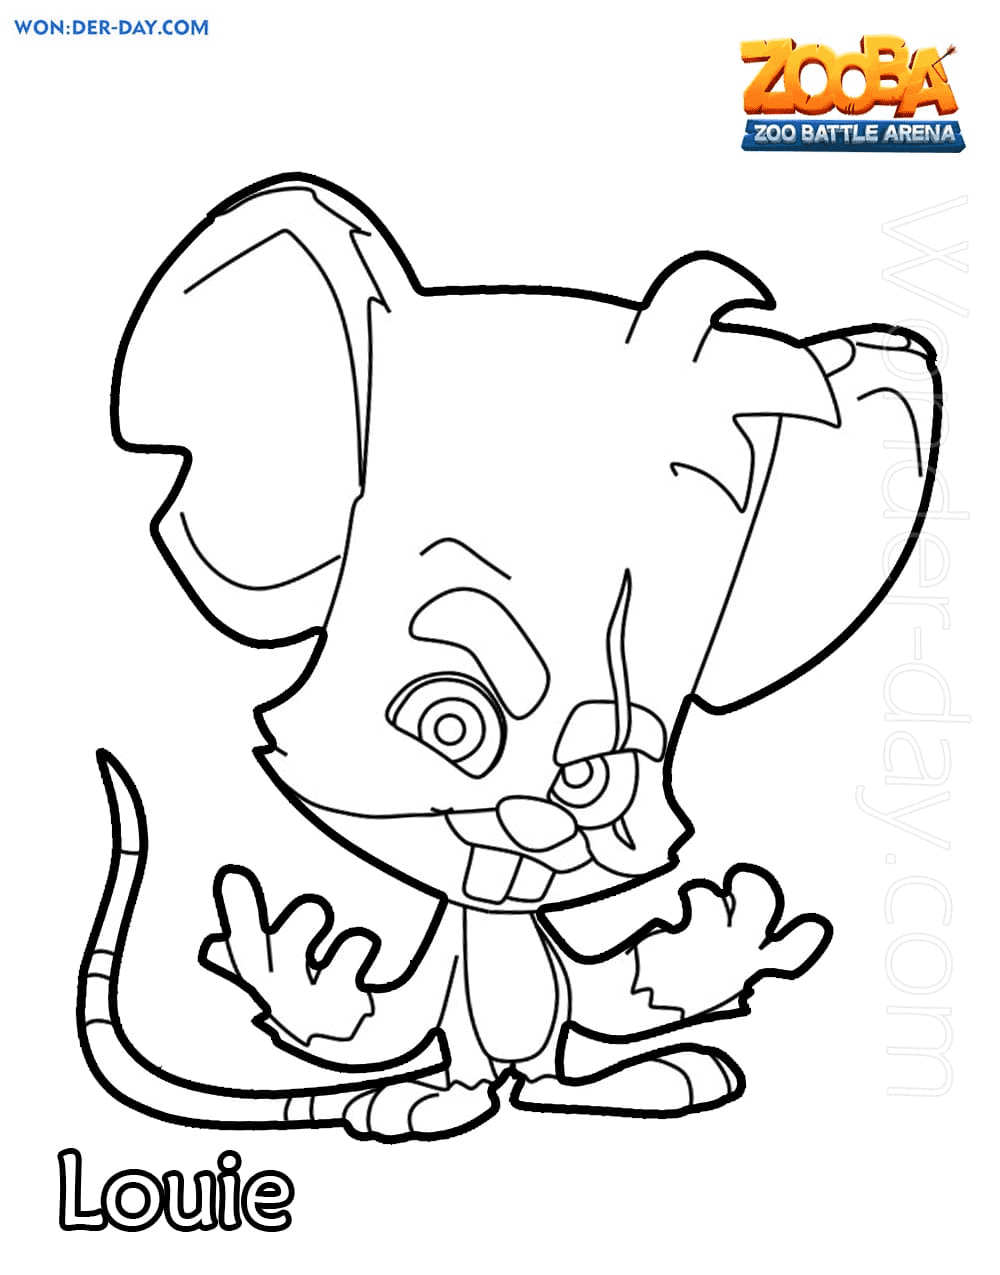 Louie Zooba Coloring Pages